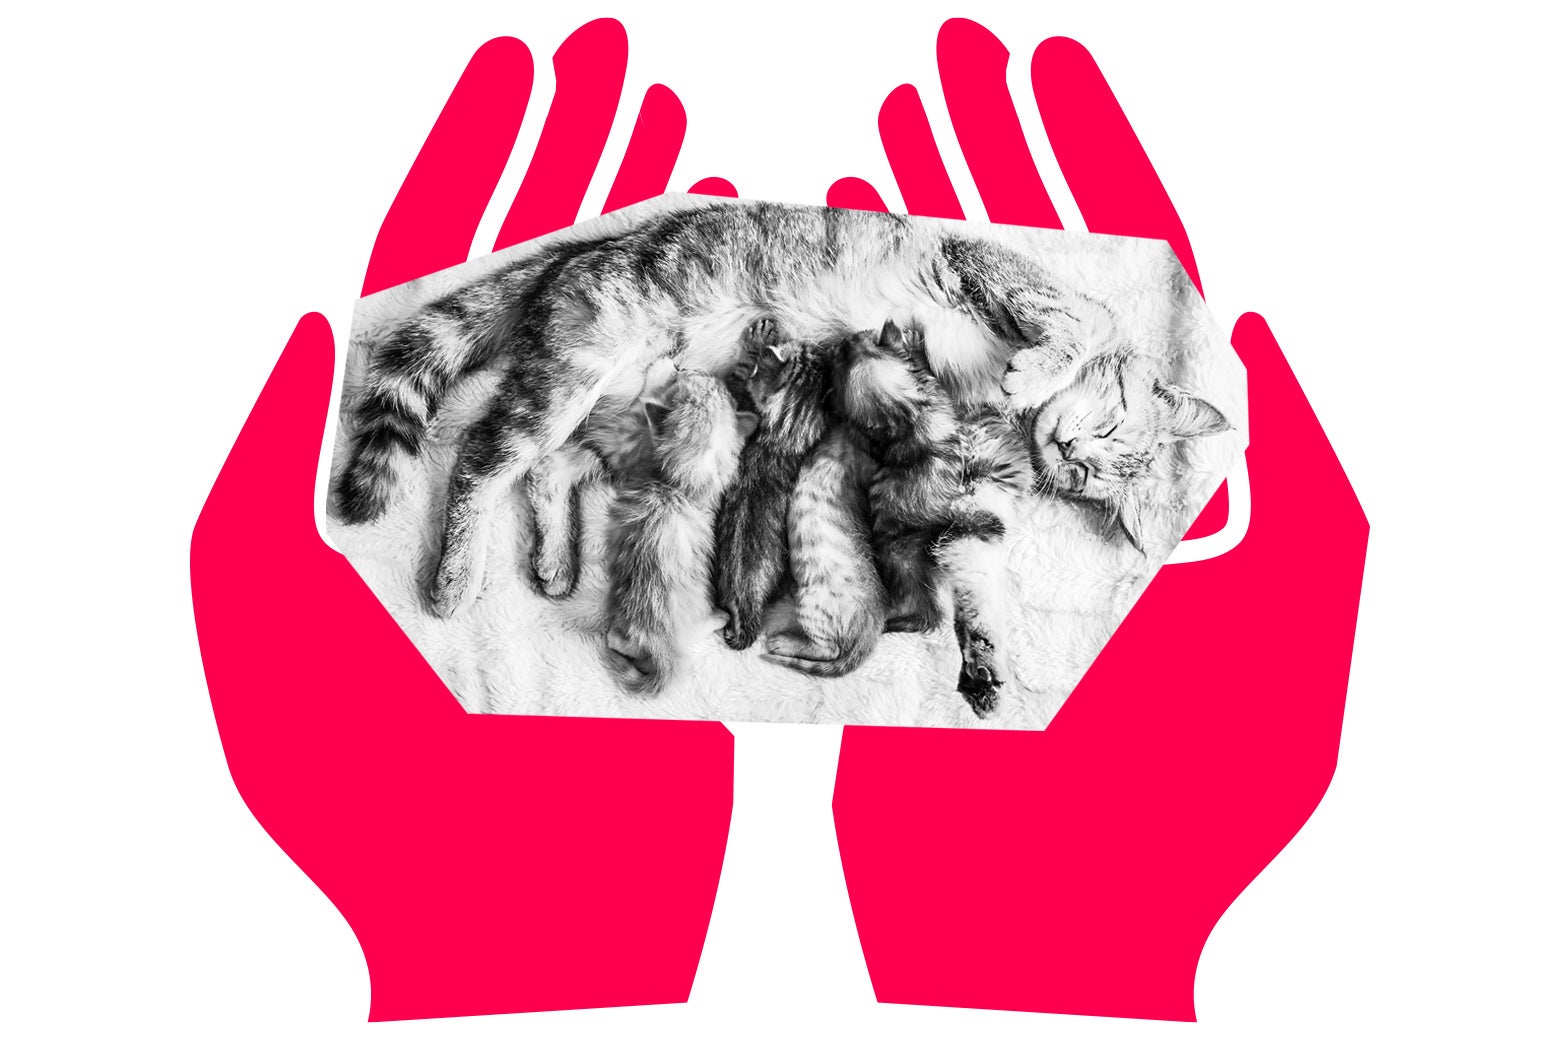 Illustrated hands holding a litter of kittens.